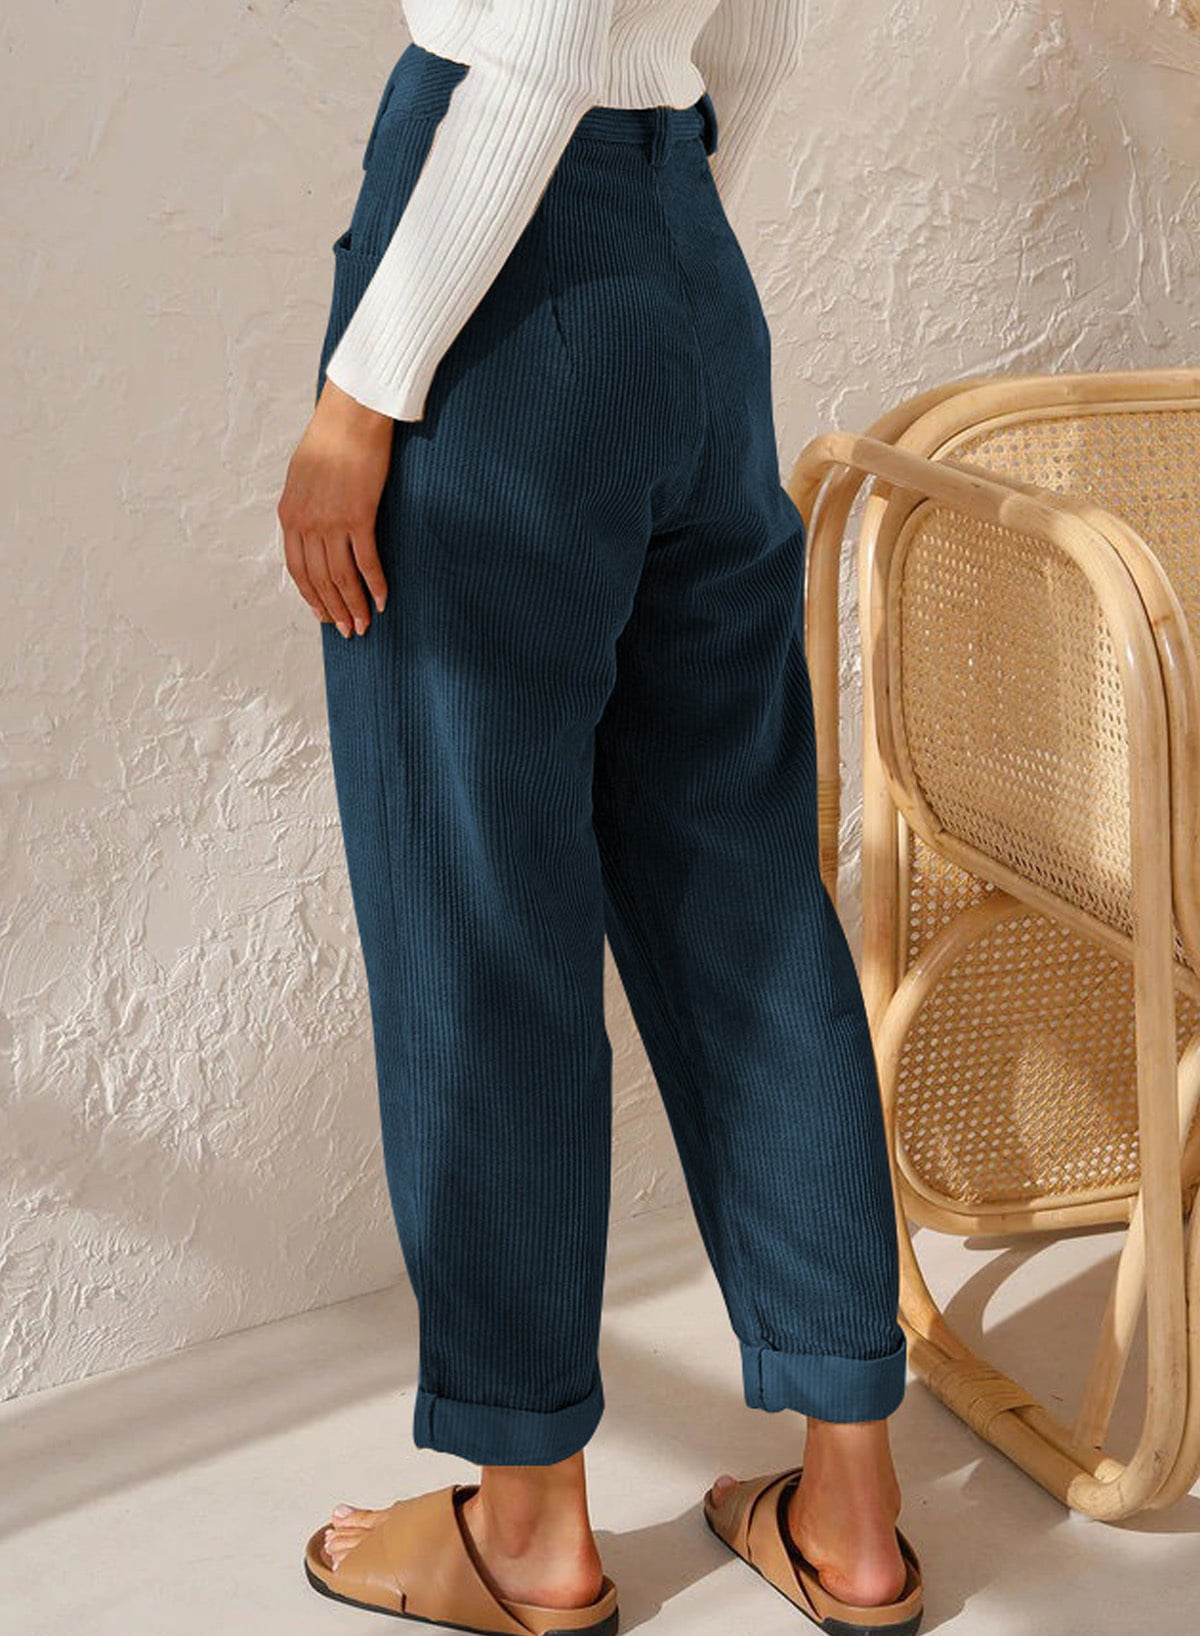 Eytino Corduroy Pants for Women Casual High Waisted Straight Leg Pants  Loose Comfy Trousers with Pockets Blue XS Female